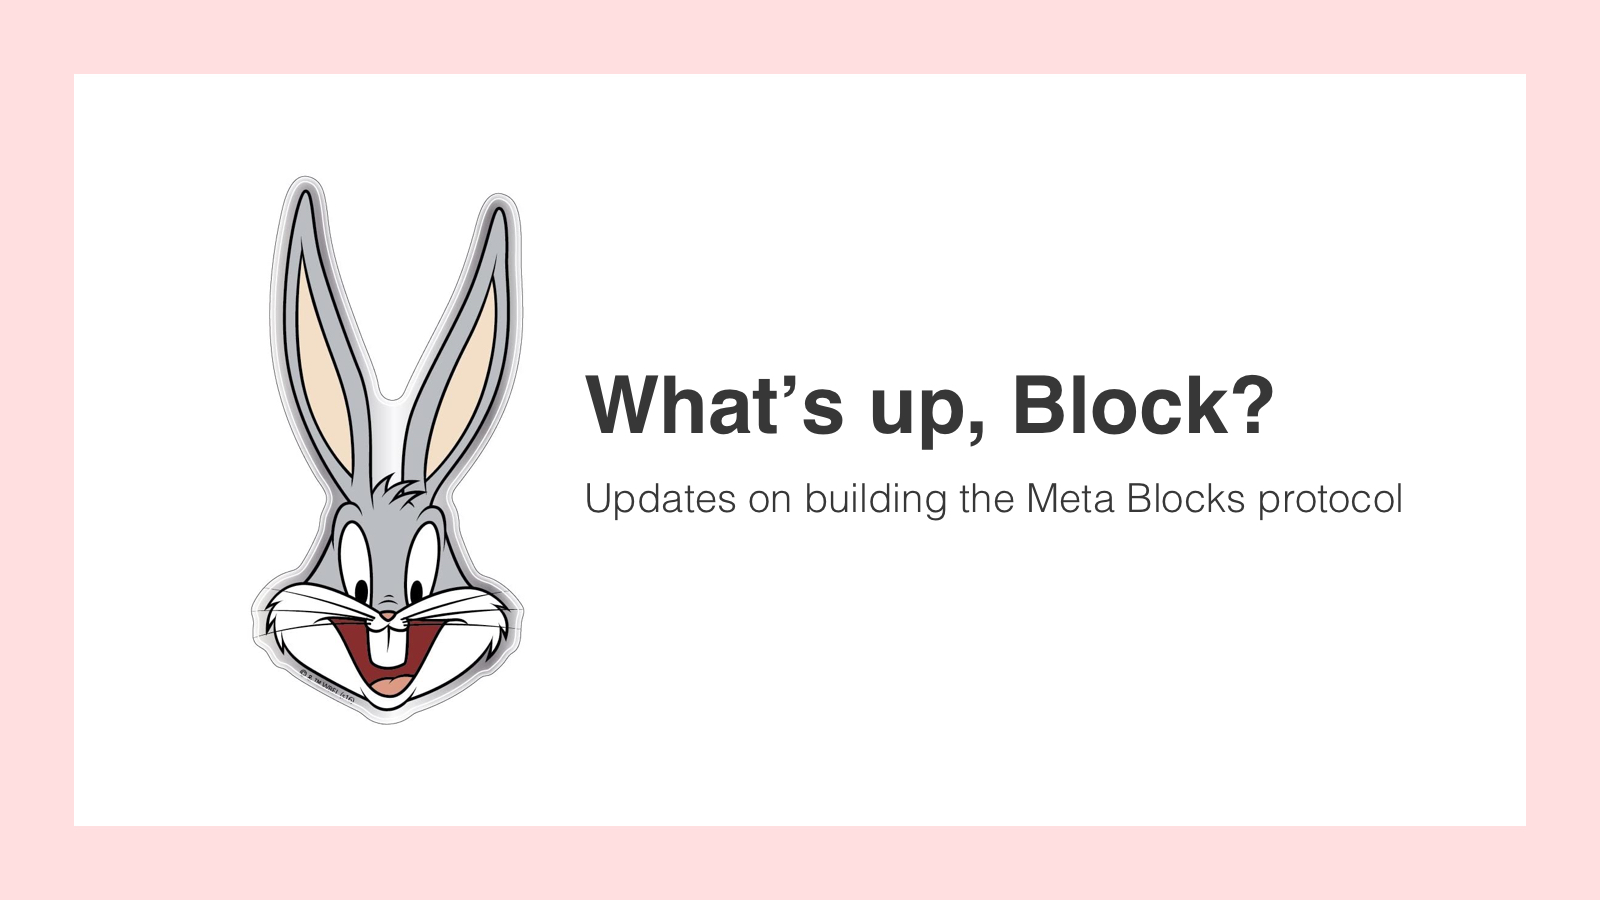 What's up, Block? - February 10, 2022 to March 8, 2022 - cover image